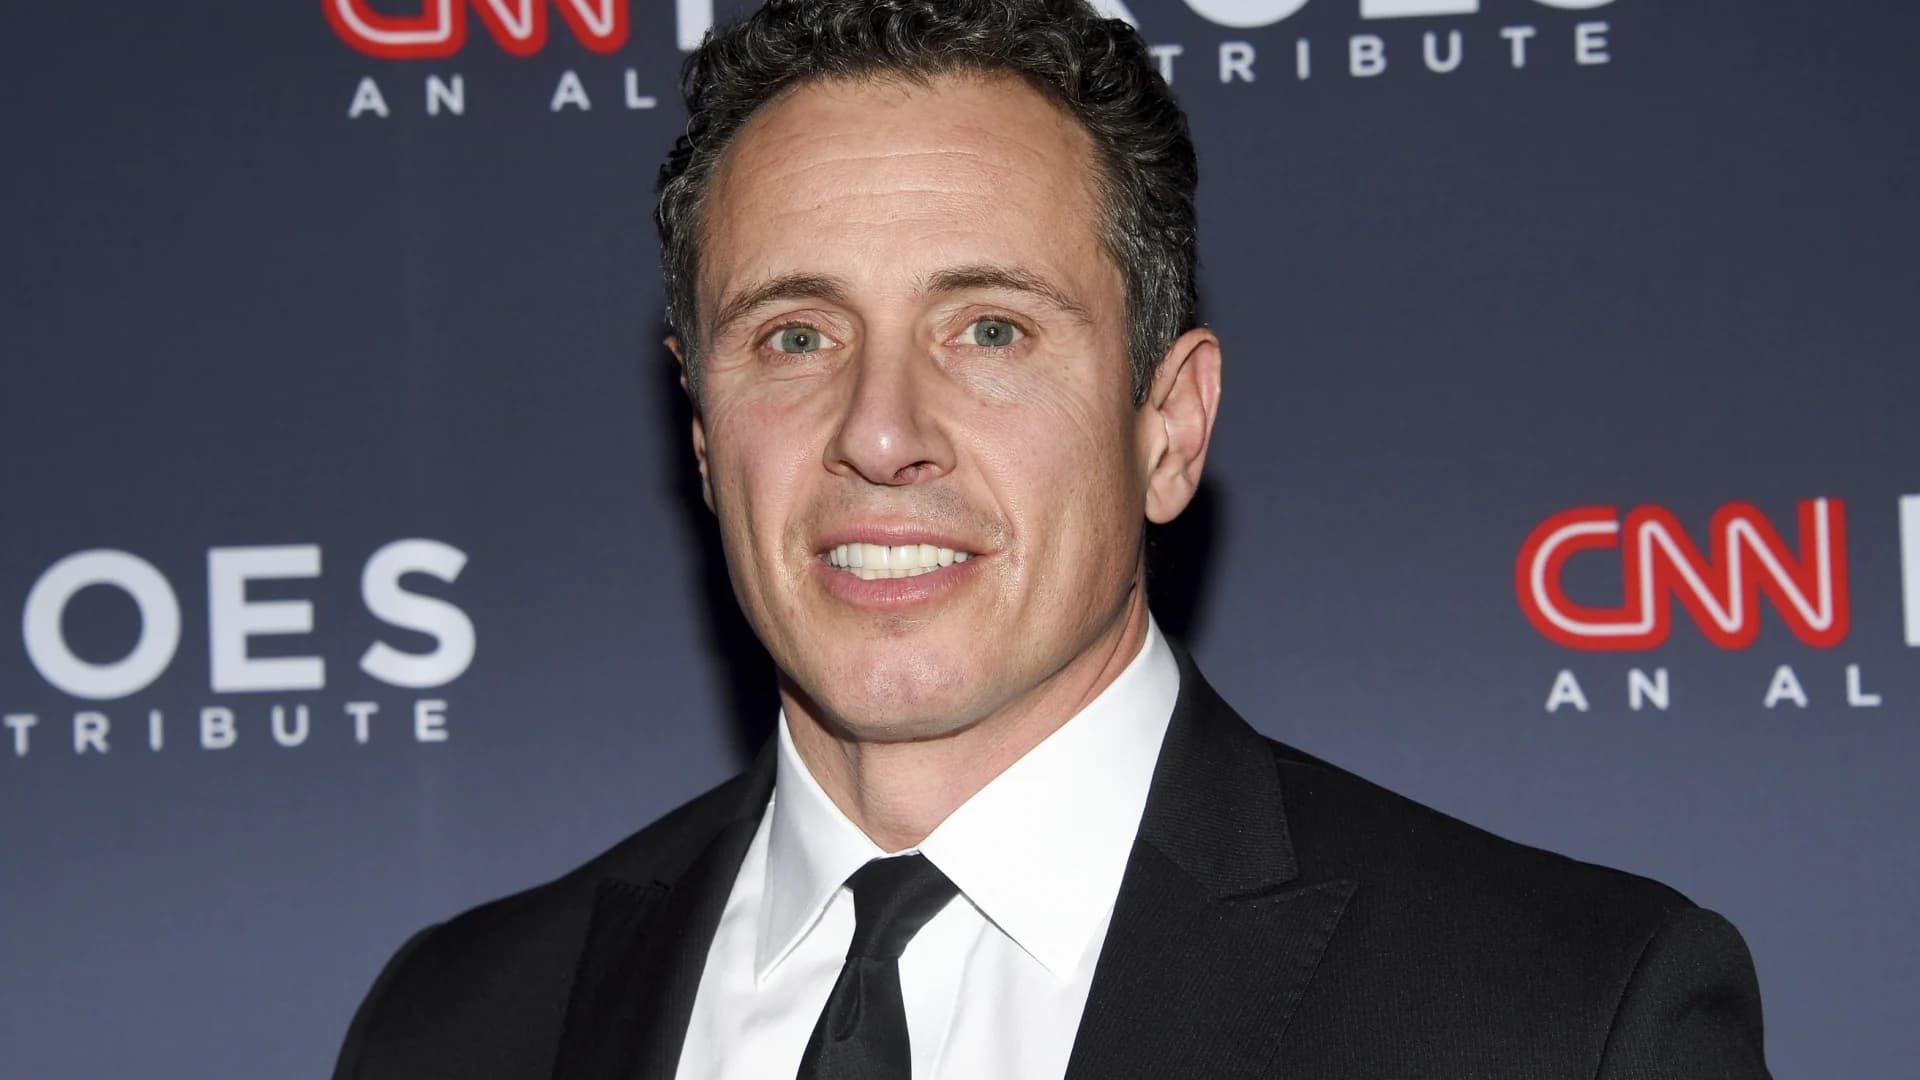 Former ABC News executive says Chris Cuomo harassed her